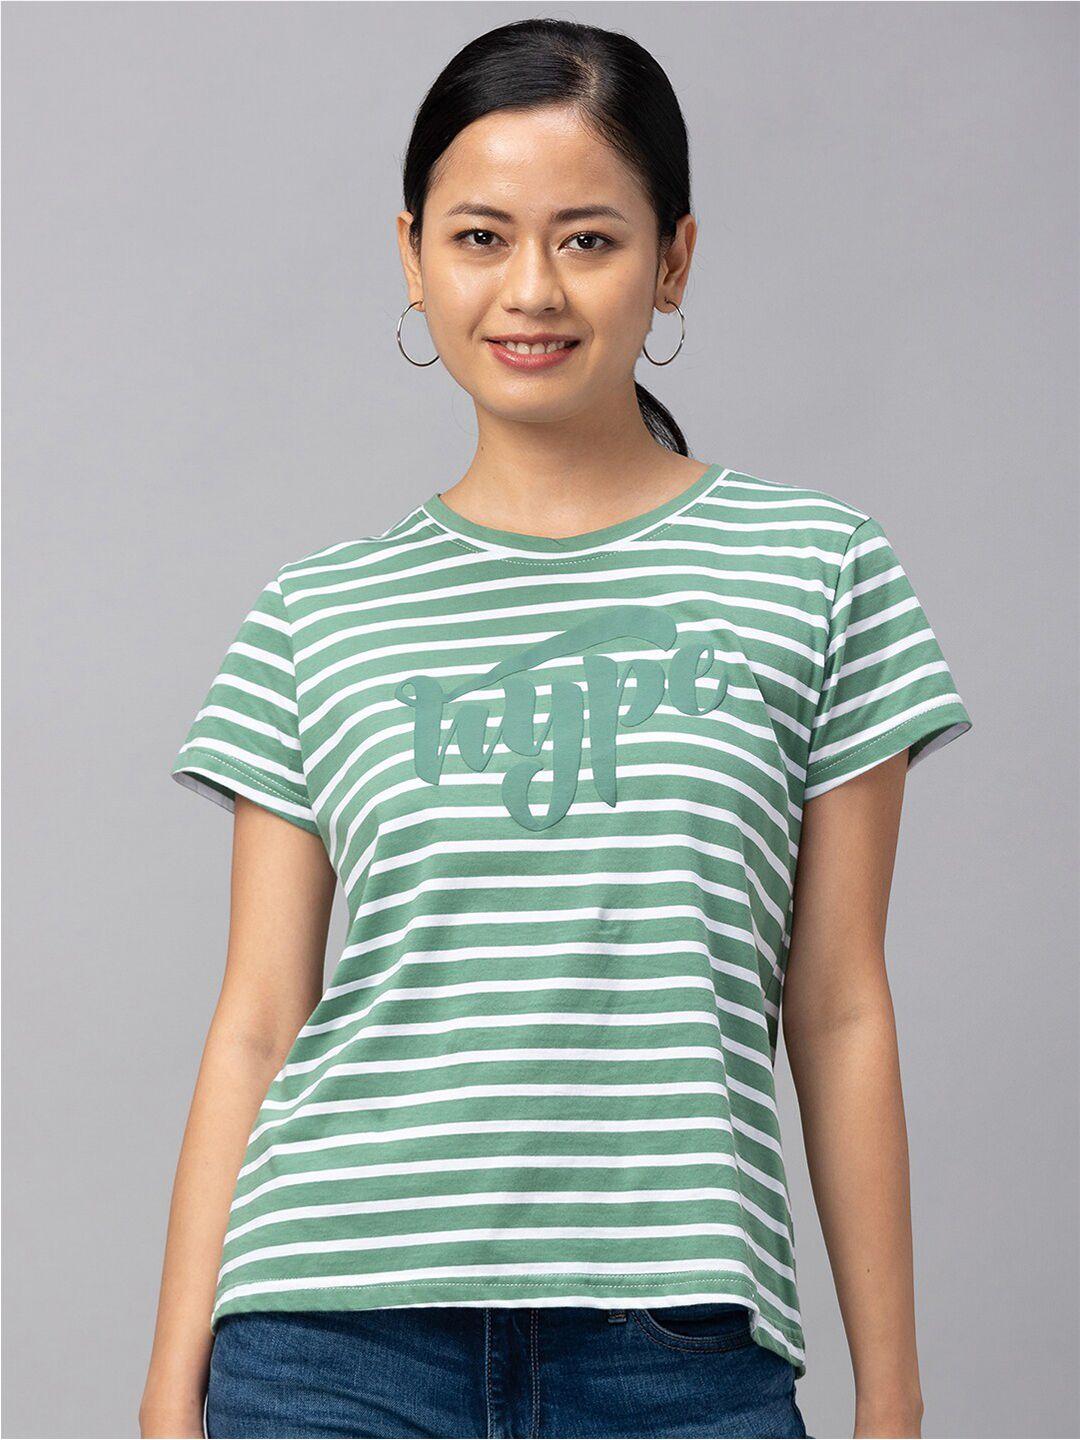 globus women olive green typography striped applique t-shirt